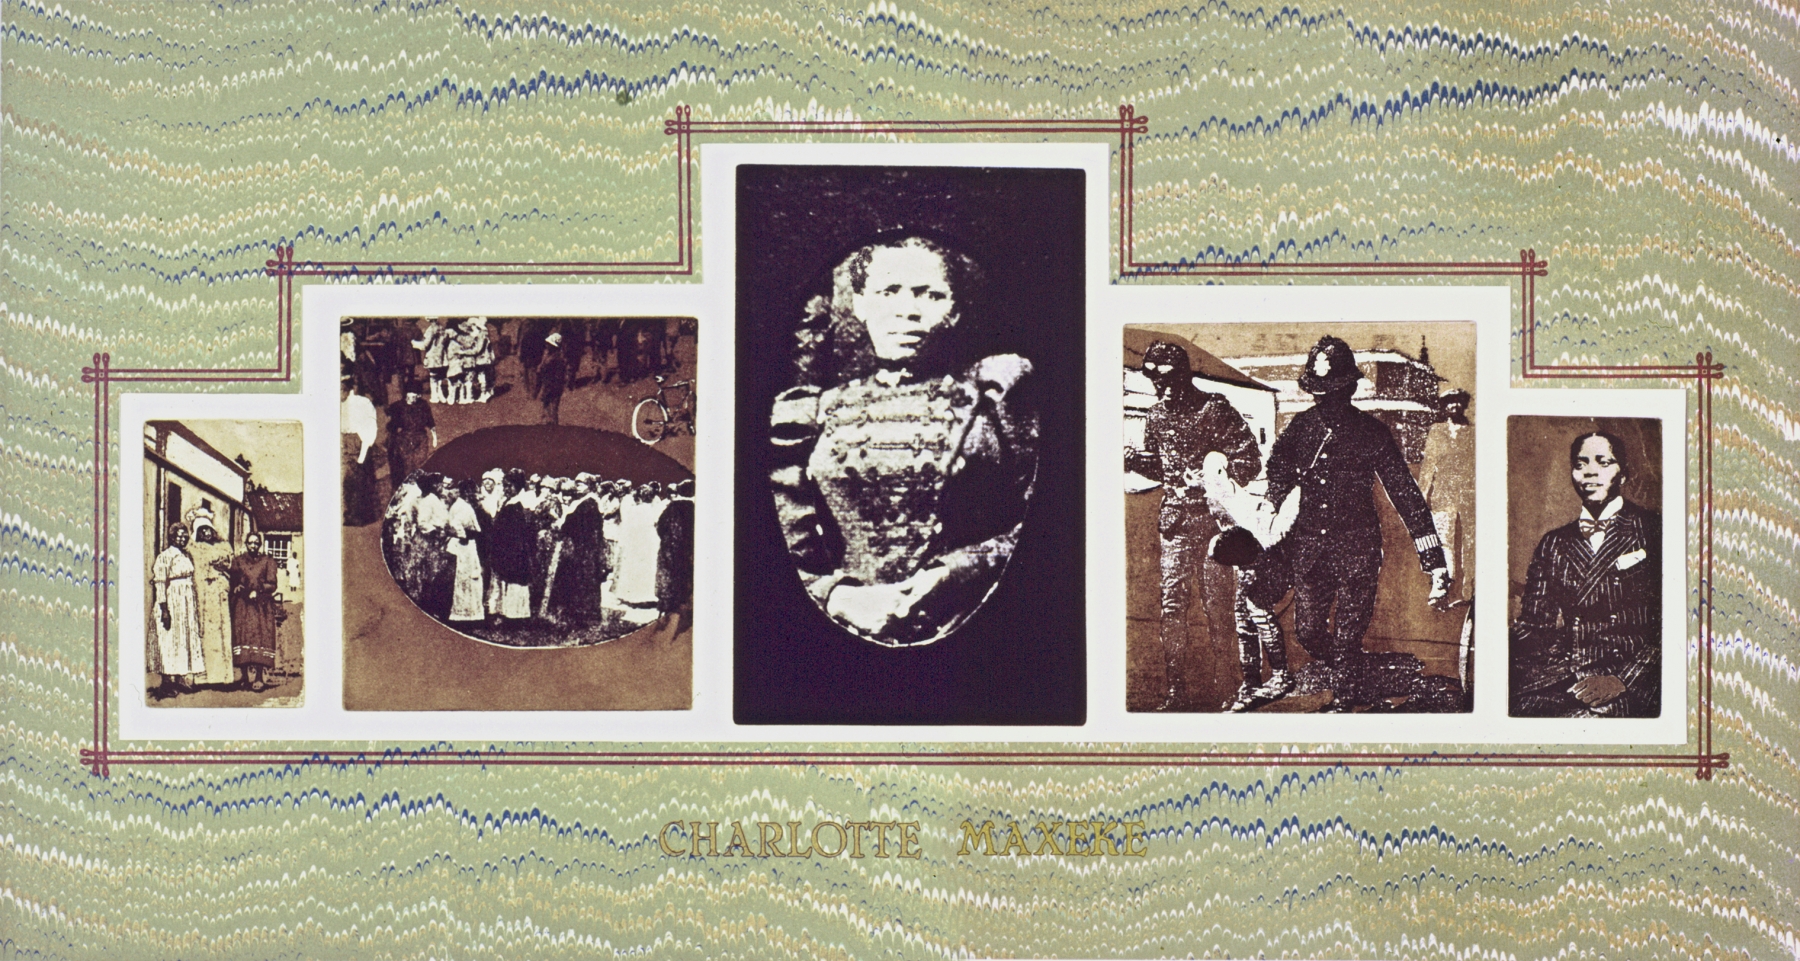 Sue Williamson

A Few South Africans: Charlotte Maxeke, 1984

Photo etching and screenprint collage

70 x 100 cm (27.6 x 39.4 in)

Edition 13 of 35

Enquire